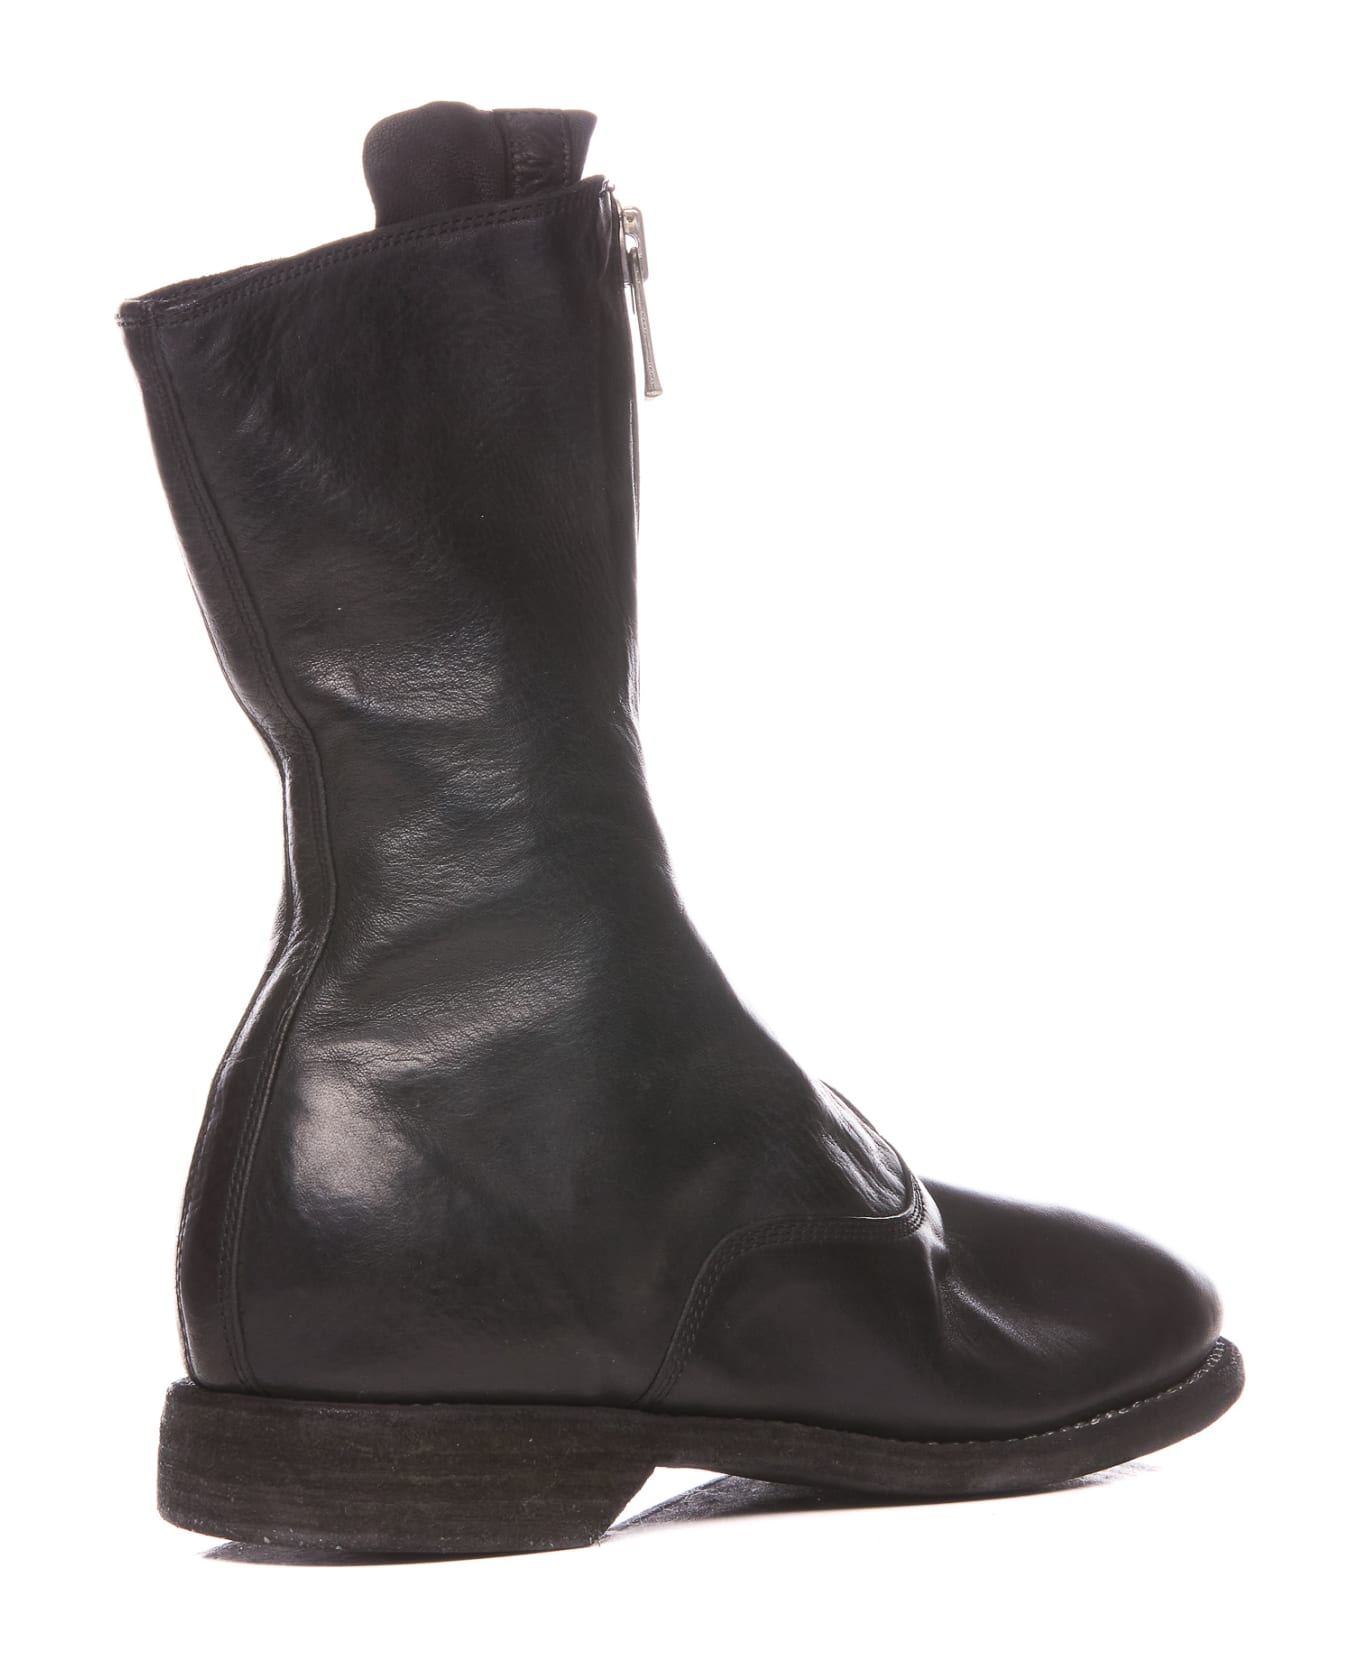 Guidi Front Zip Army Boots - Black ブーツ